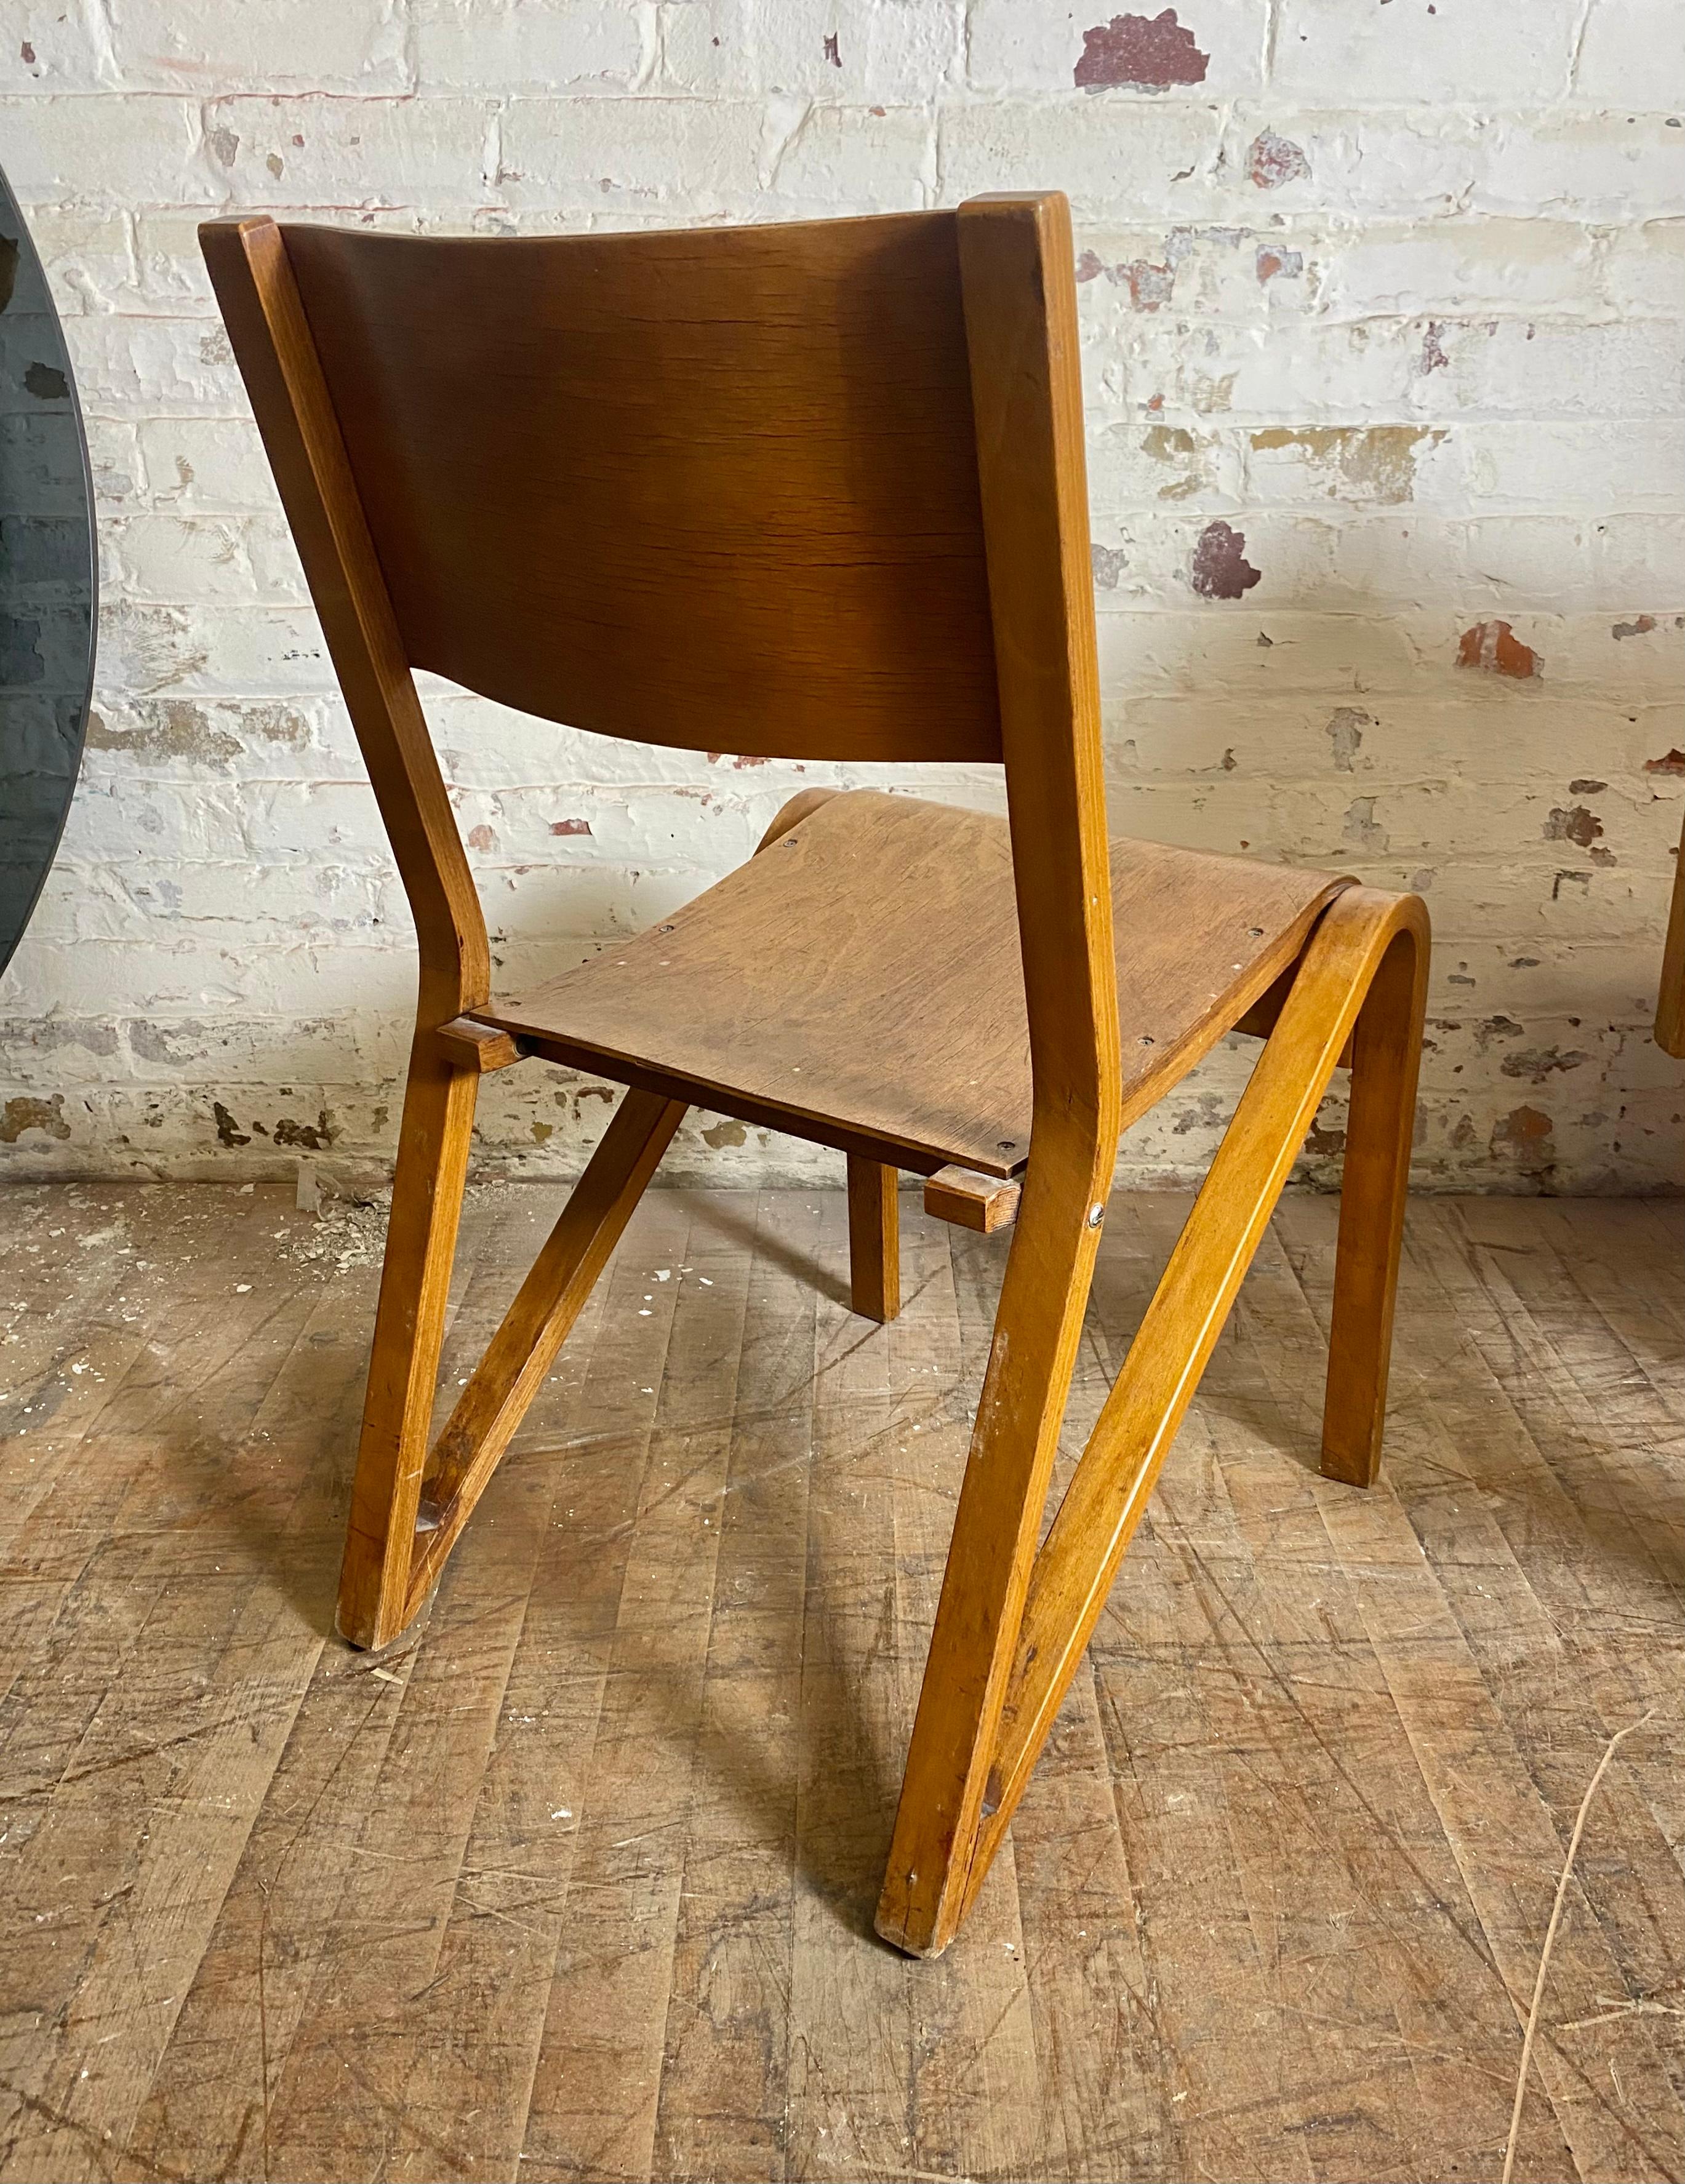 Unusual Set 6 Industrial Modernist Bauhaus Bent Plywood Stacking Chairs In Good Condition For Sale In Buffalo, NY